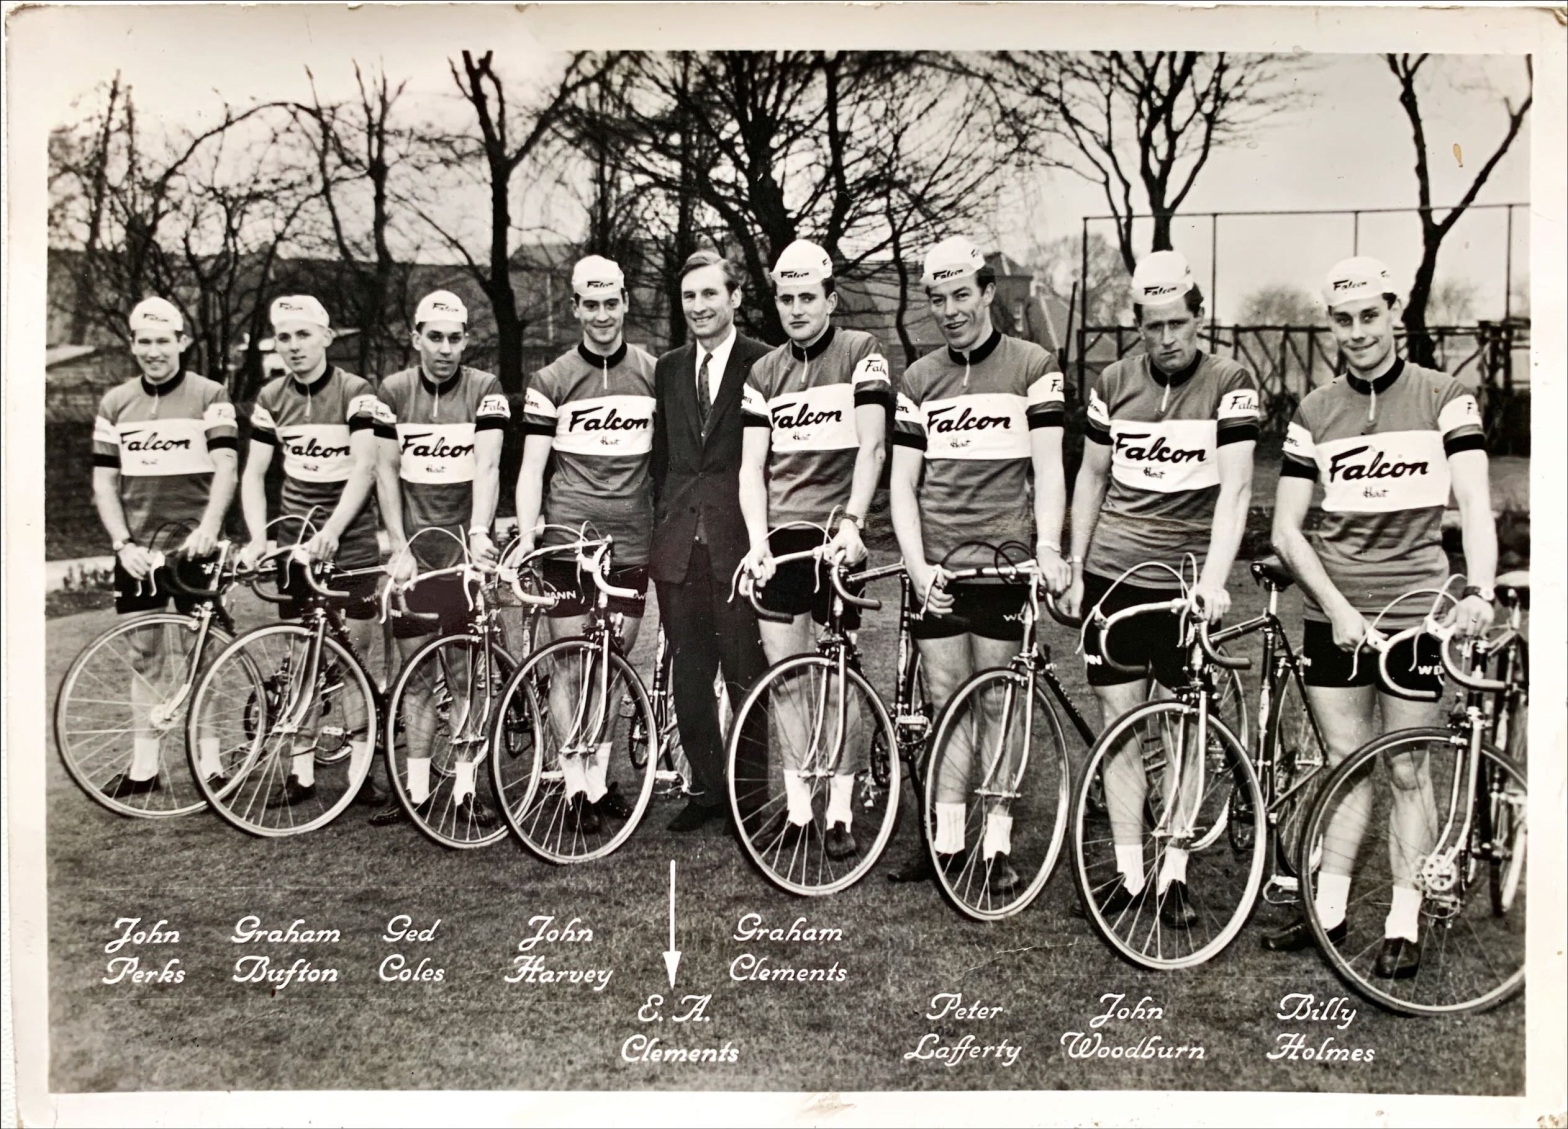 The 1963 Falcon team riders with bikes and manager